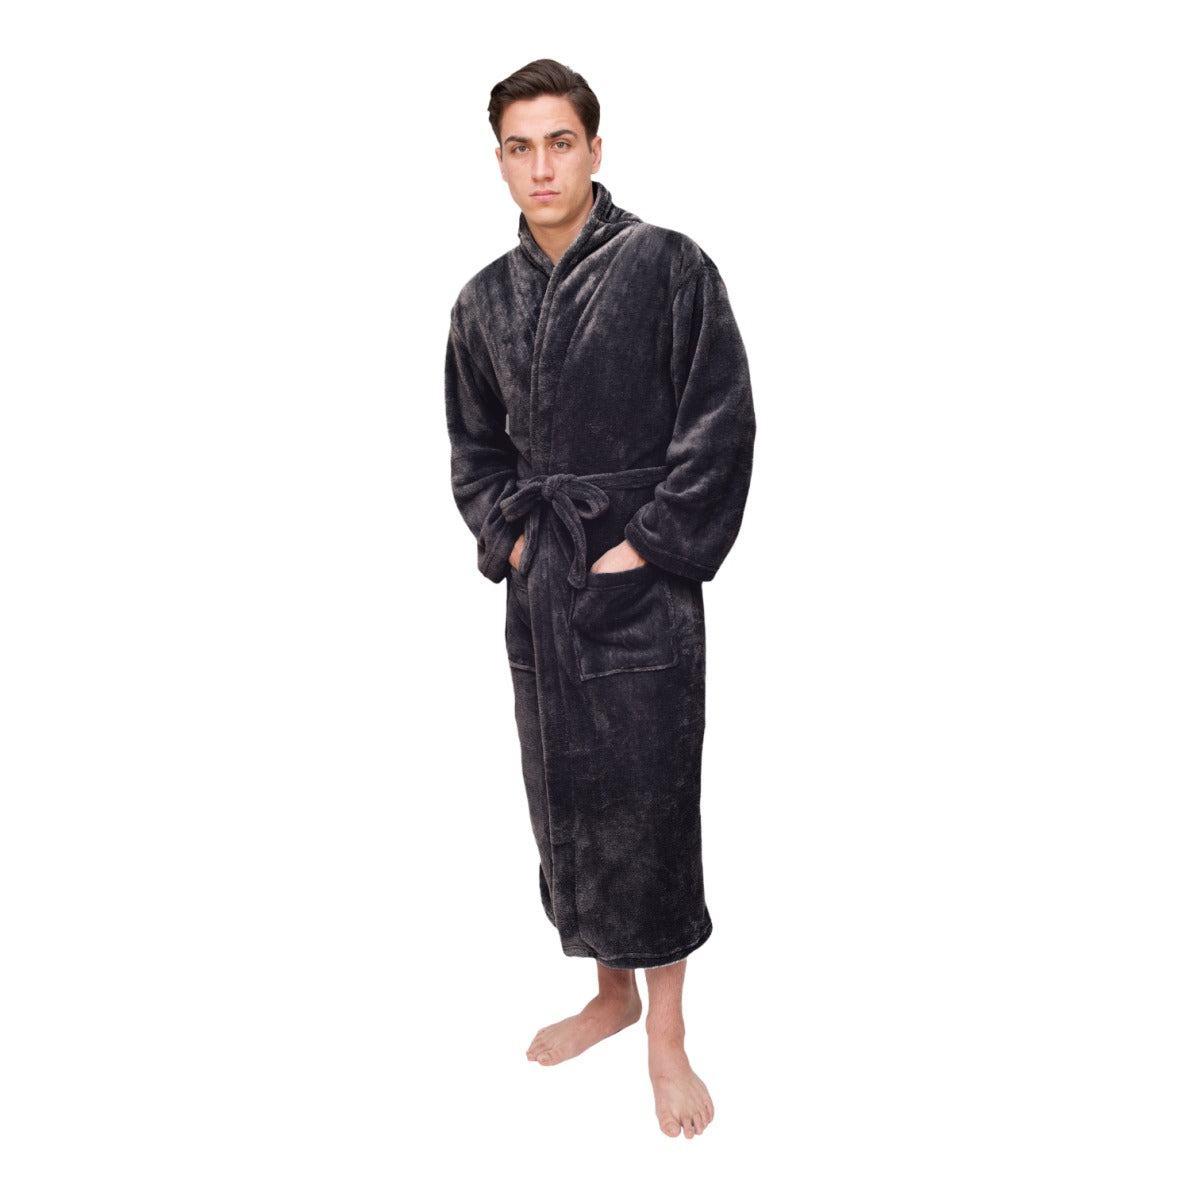 Robes for Couples